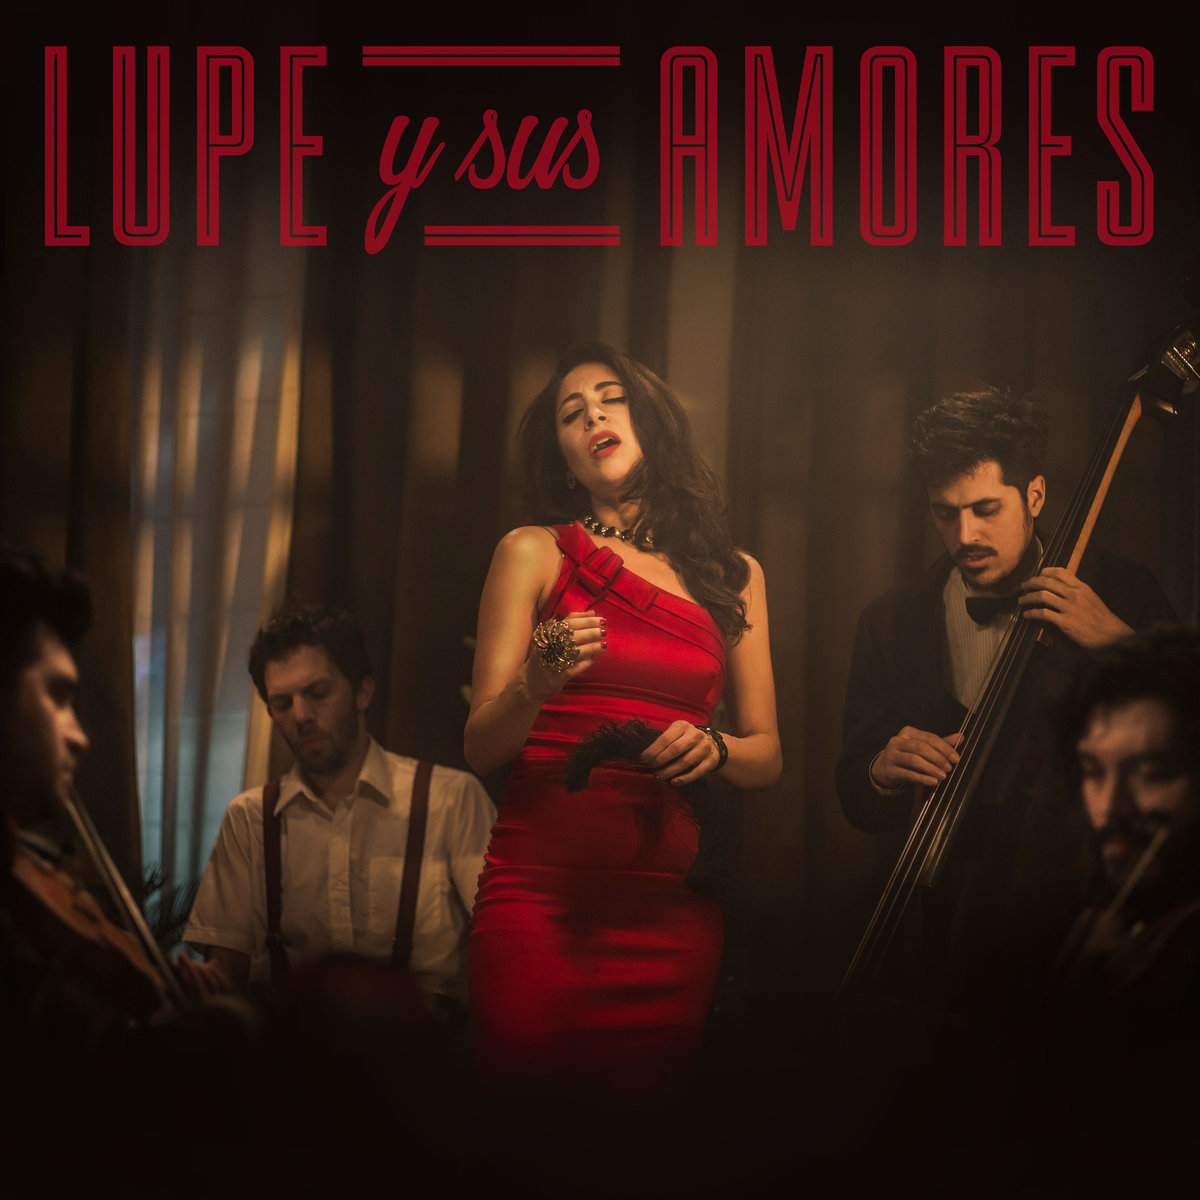 LUPE Y SUS AMORES / ルーペ & スス・アモーレス / LUPE Y SUS AMORES